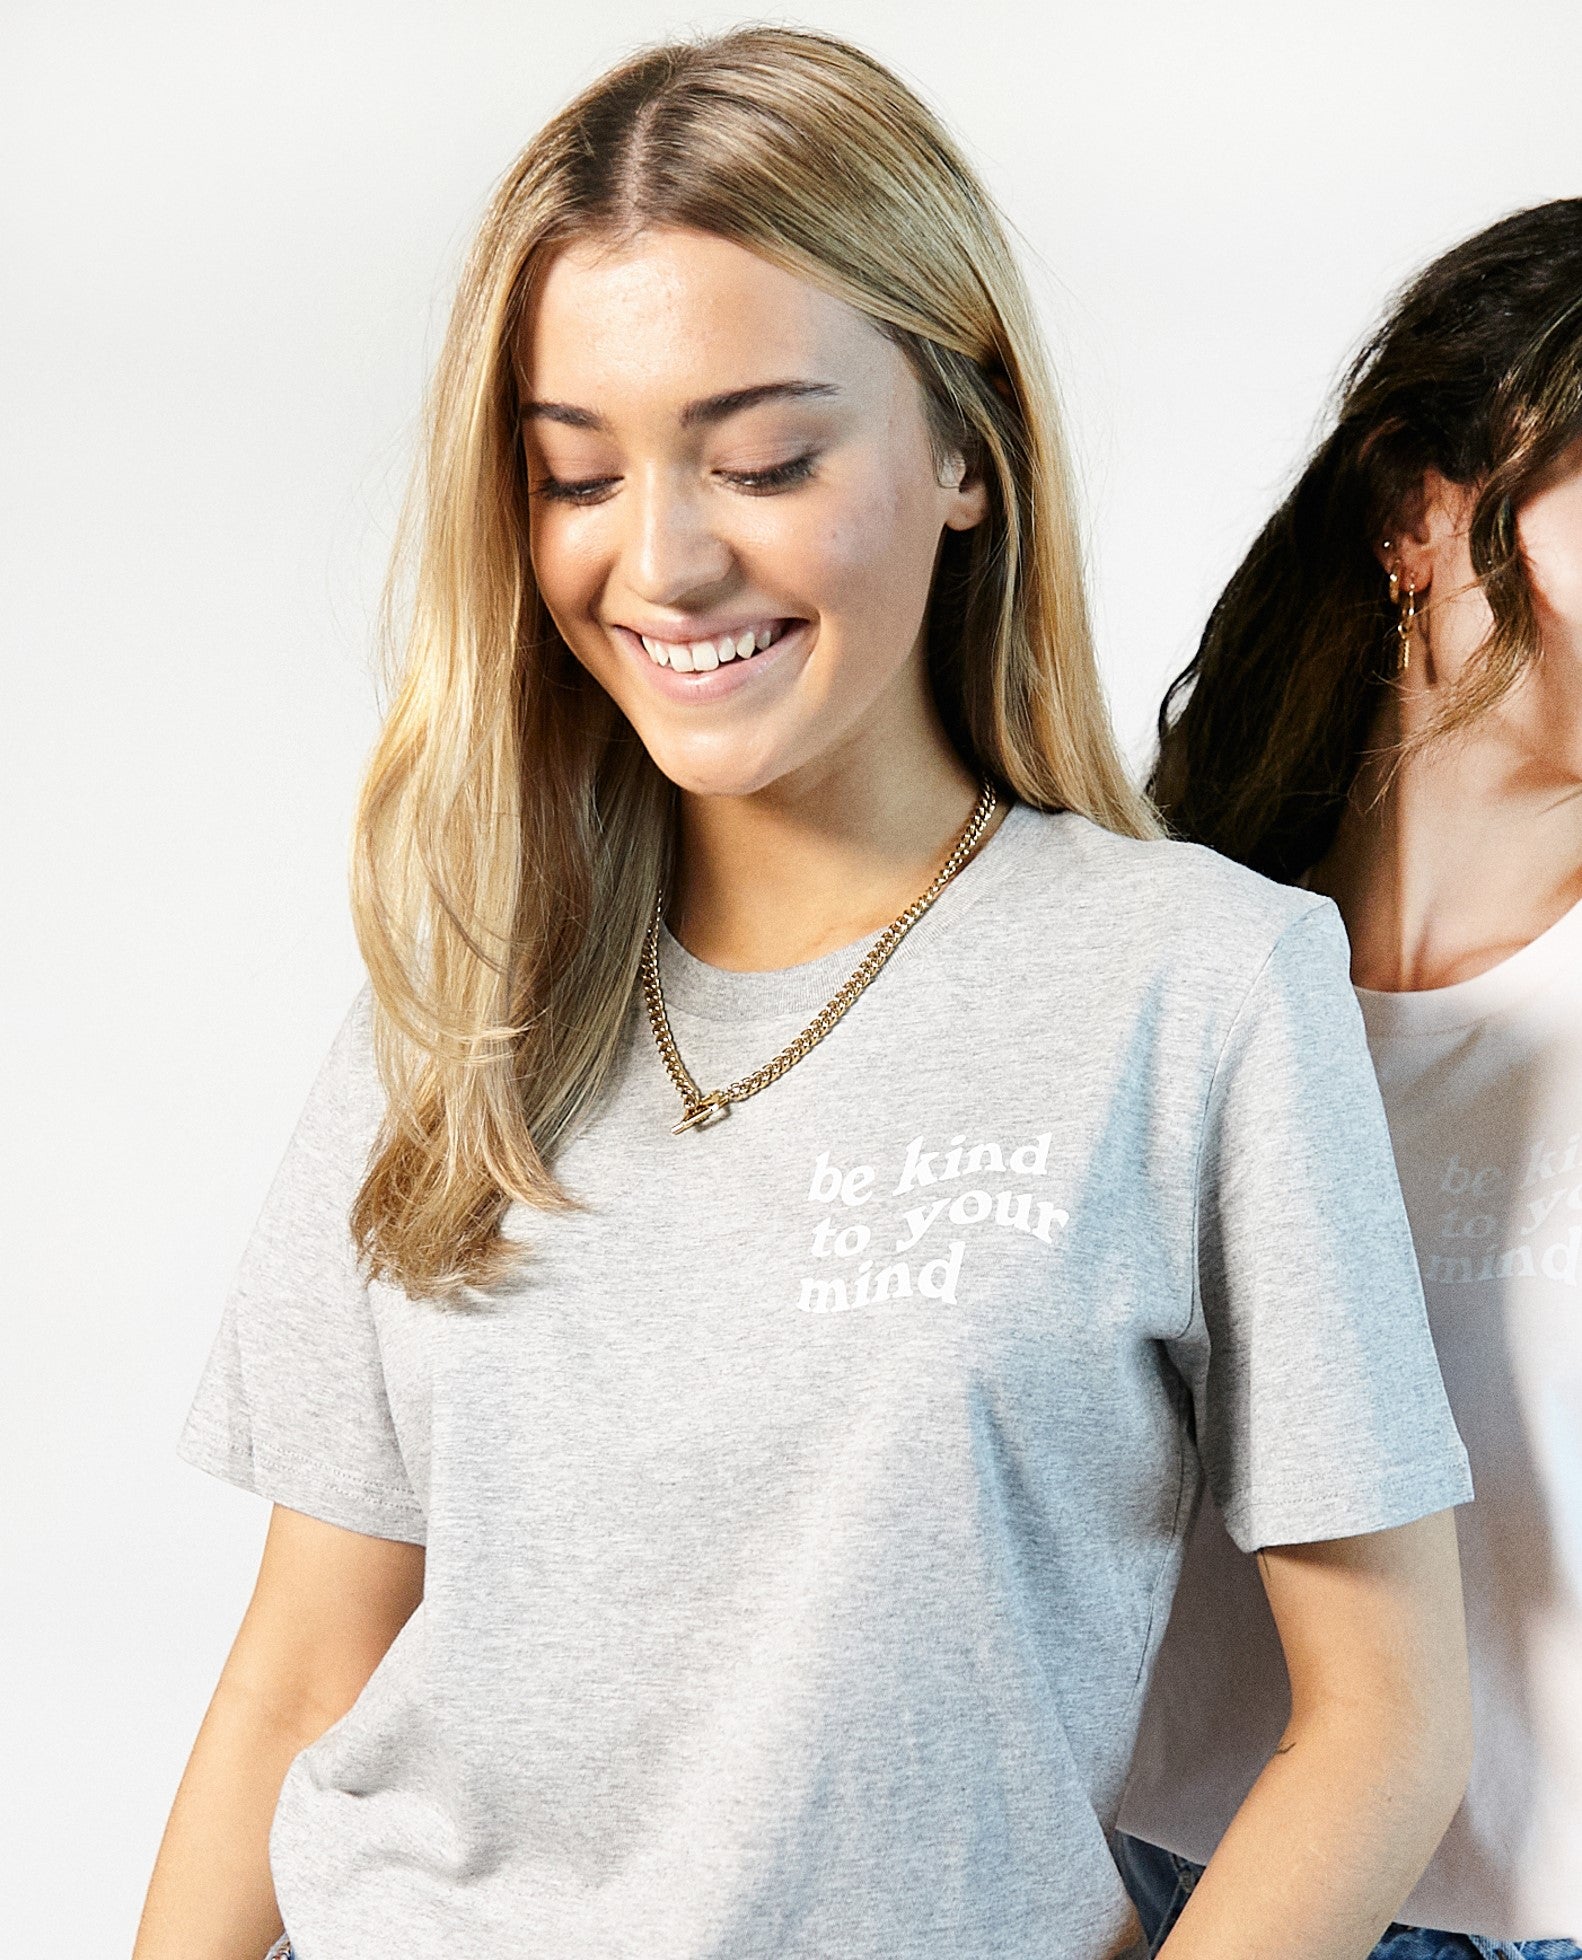 product-featured no-display be kind to your mind t-shirt woman new